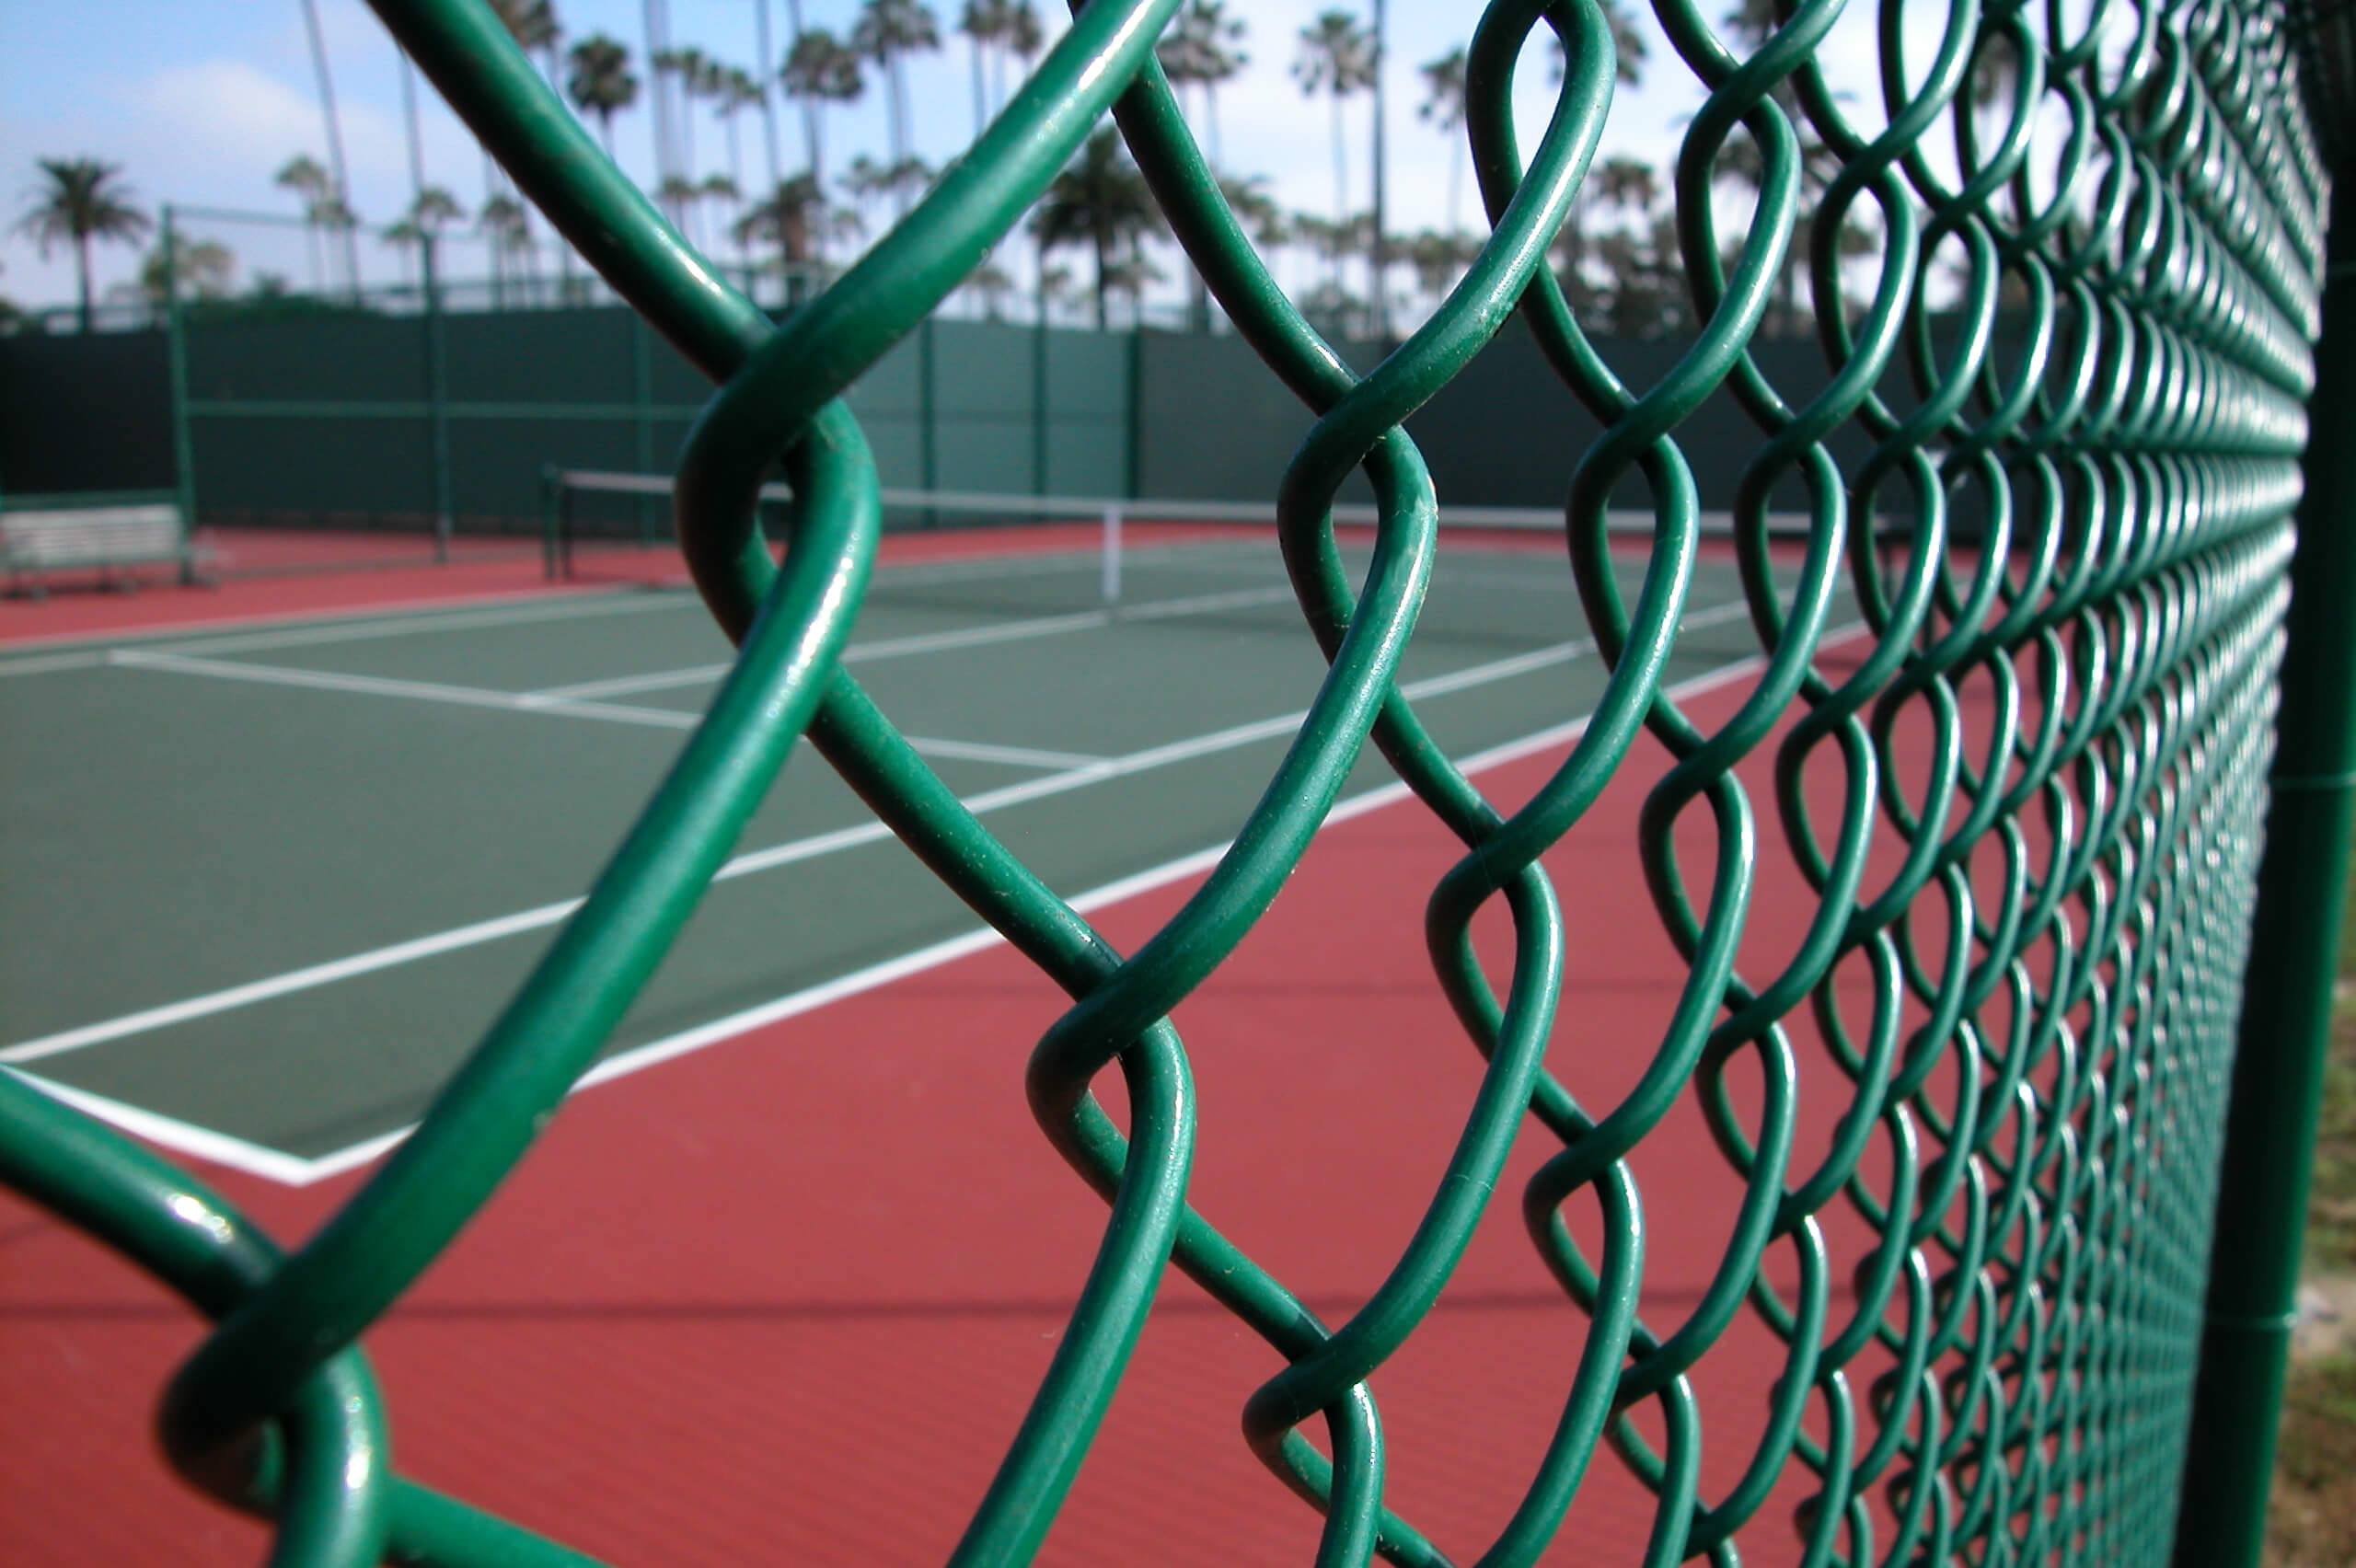 Chain Link Wire Fences: Understanding their Strengths and Limitations